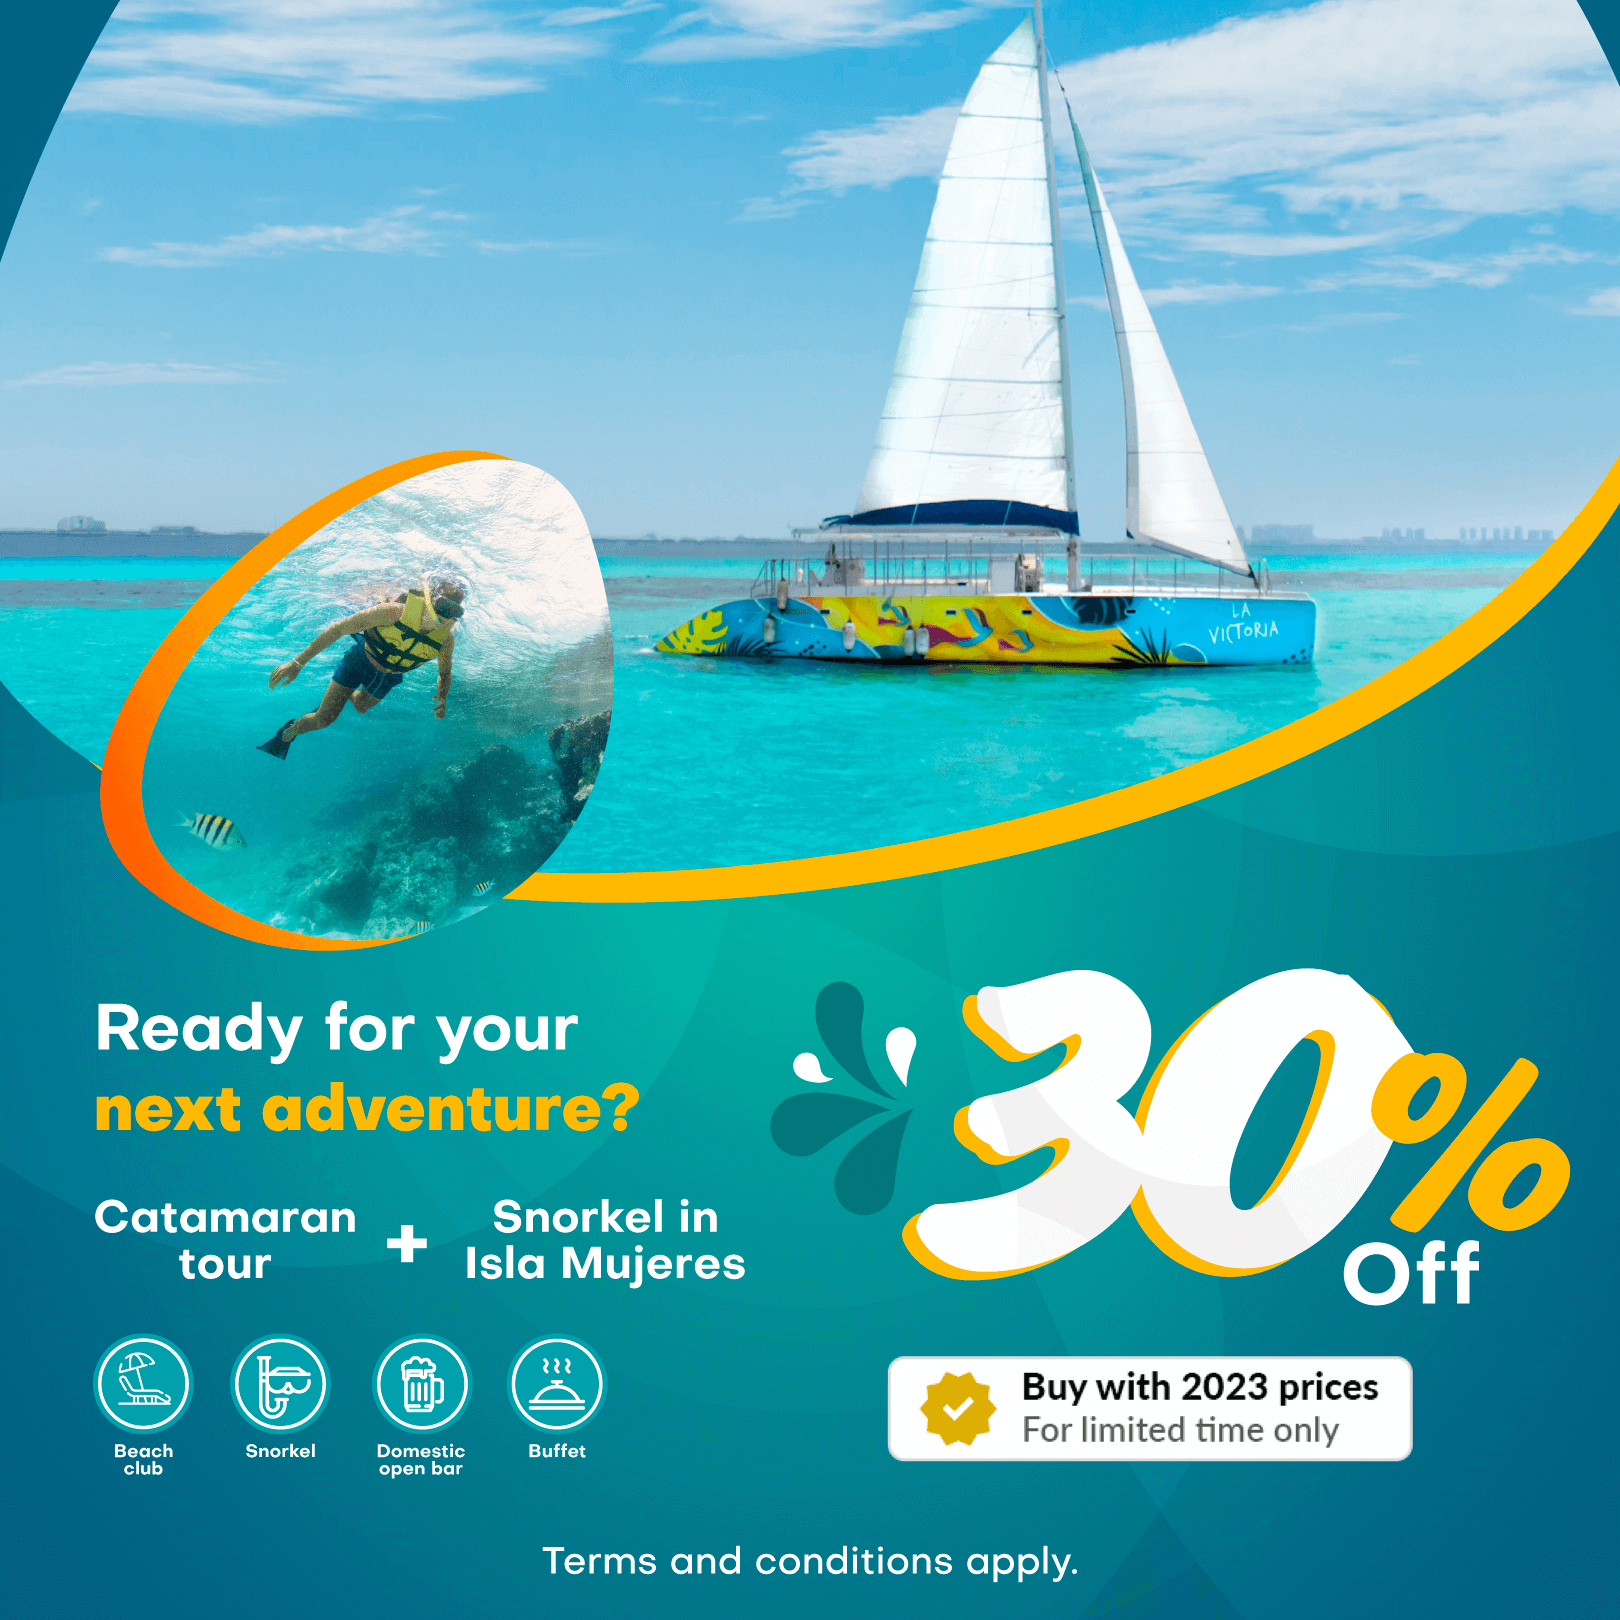 promotions on catamaran and snorkel tours in Cancun